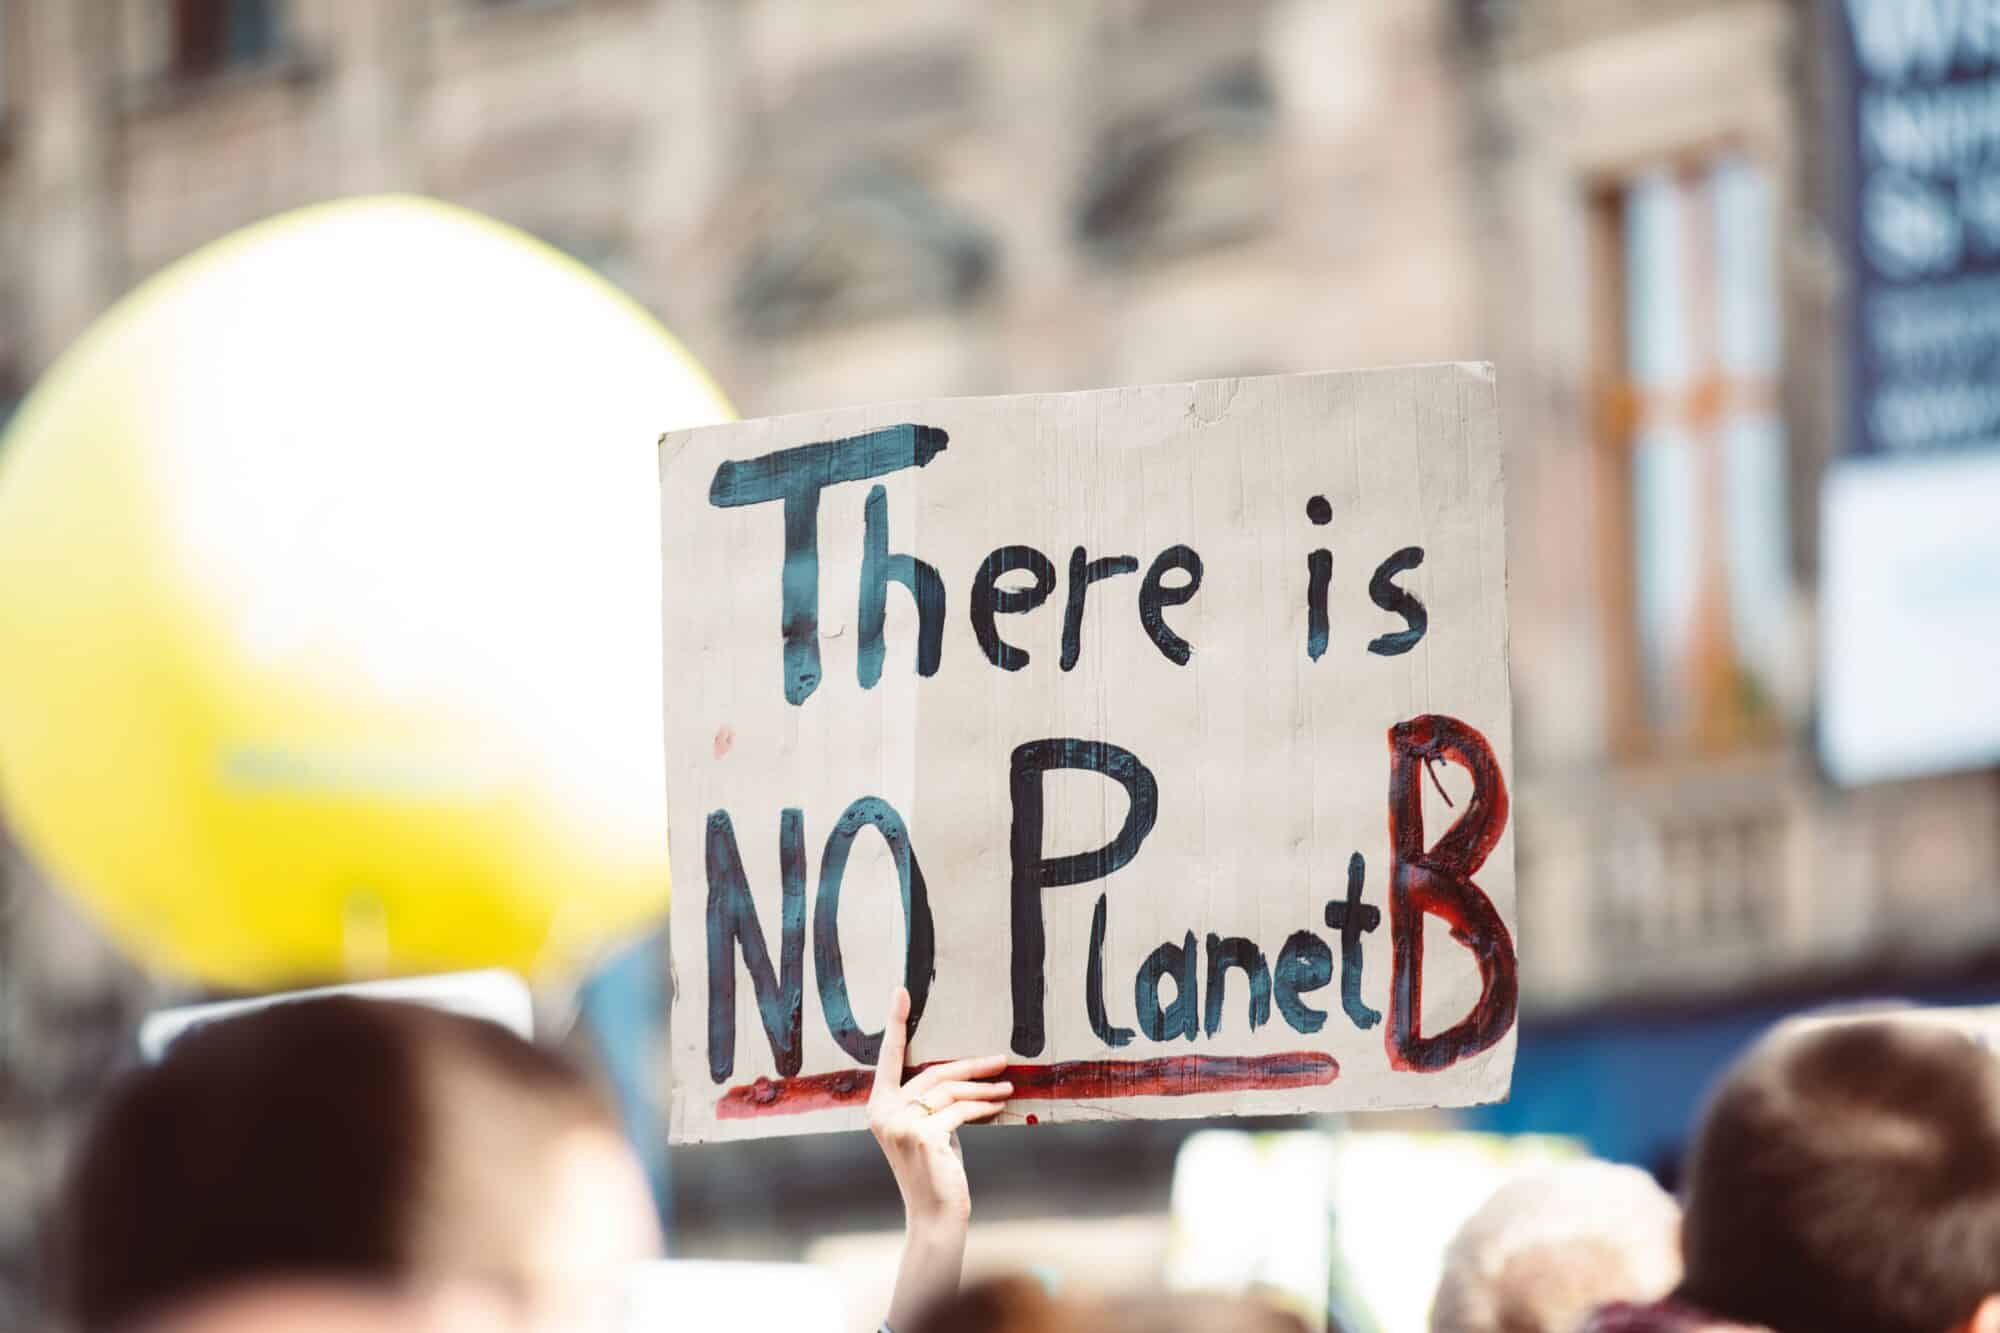 A climate protestor holds a cardboard sign that reads "There is No Planet B".